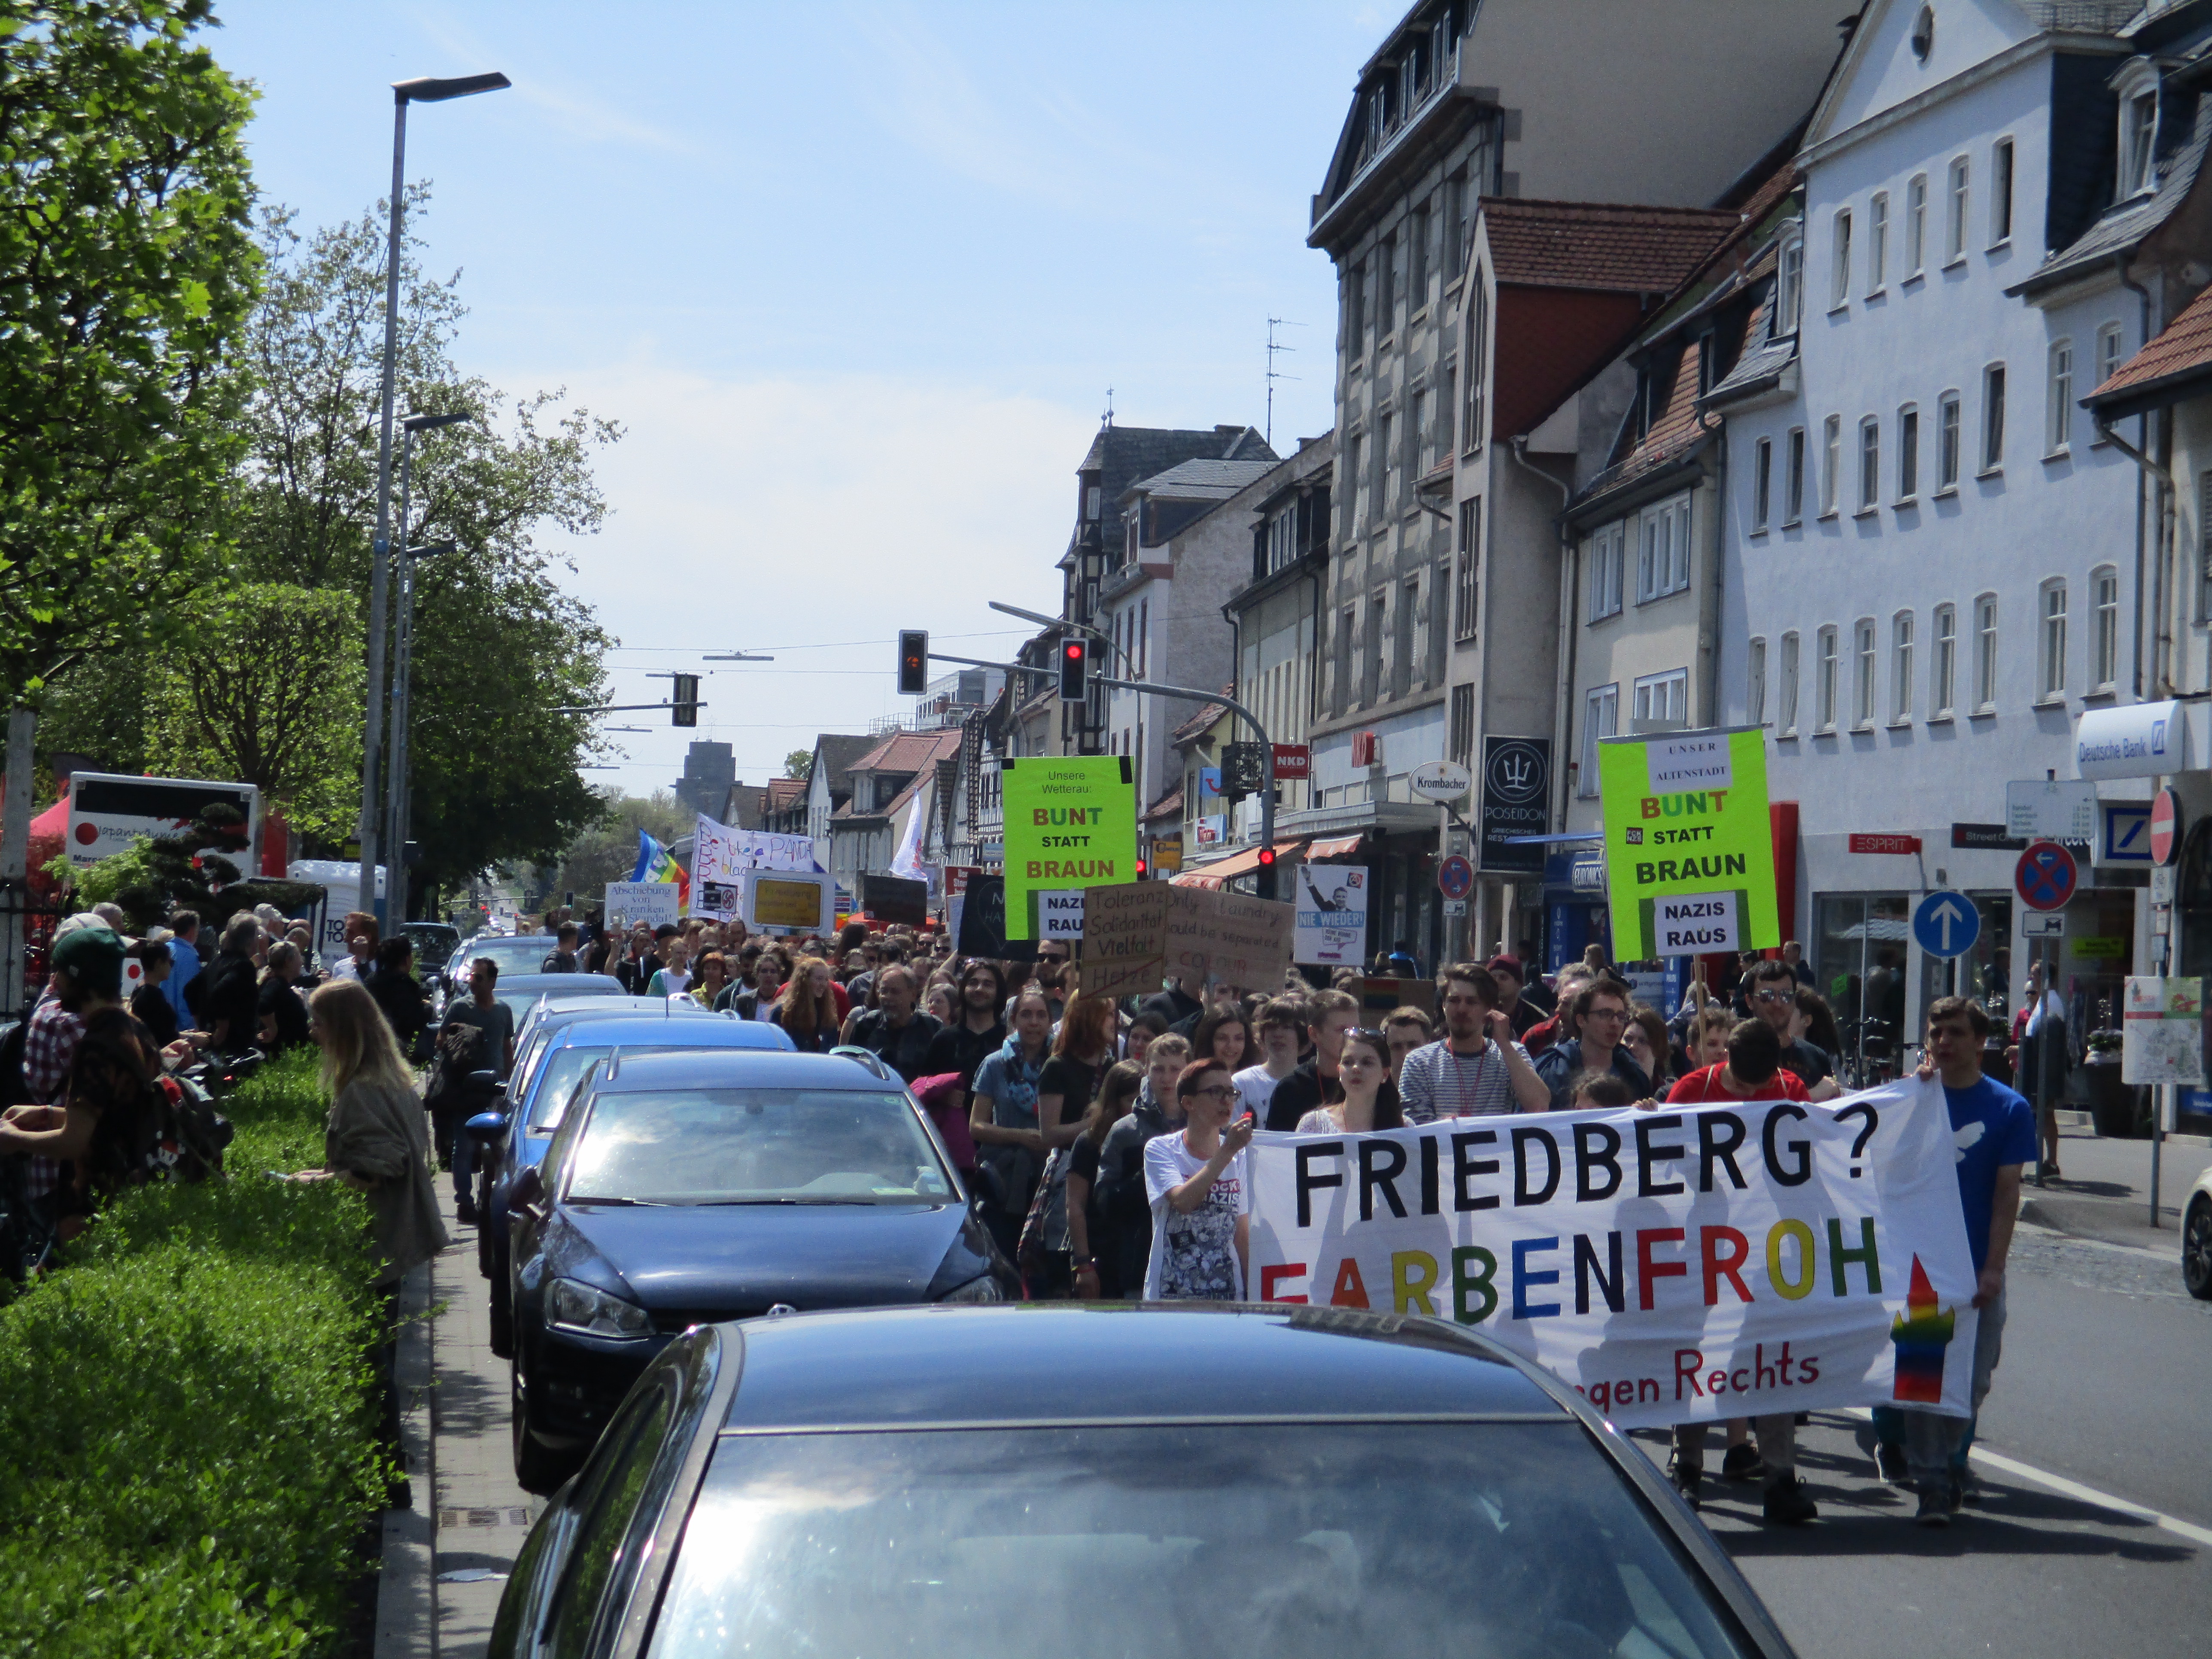 You are currently viewing 06.05.2017 – Friedberg? Farbenfroh!